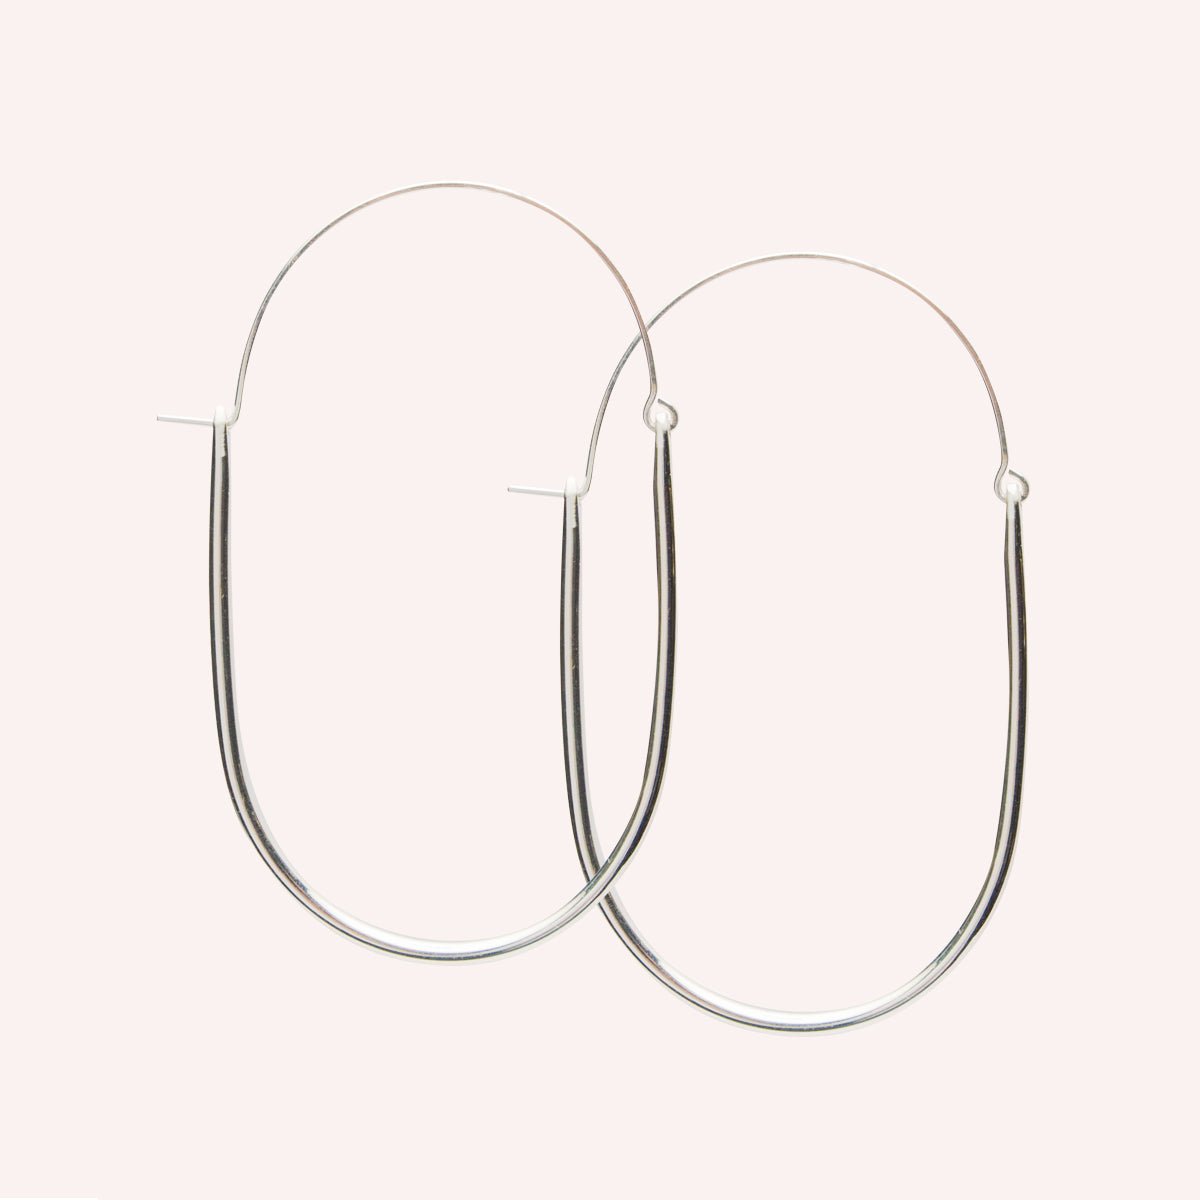 A large sterling silver U-shaped earring with an arched ear wire that meets the top of the U. Designed and handcrafted in Portland, Oregon.